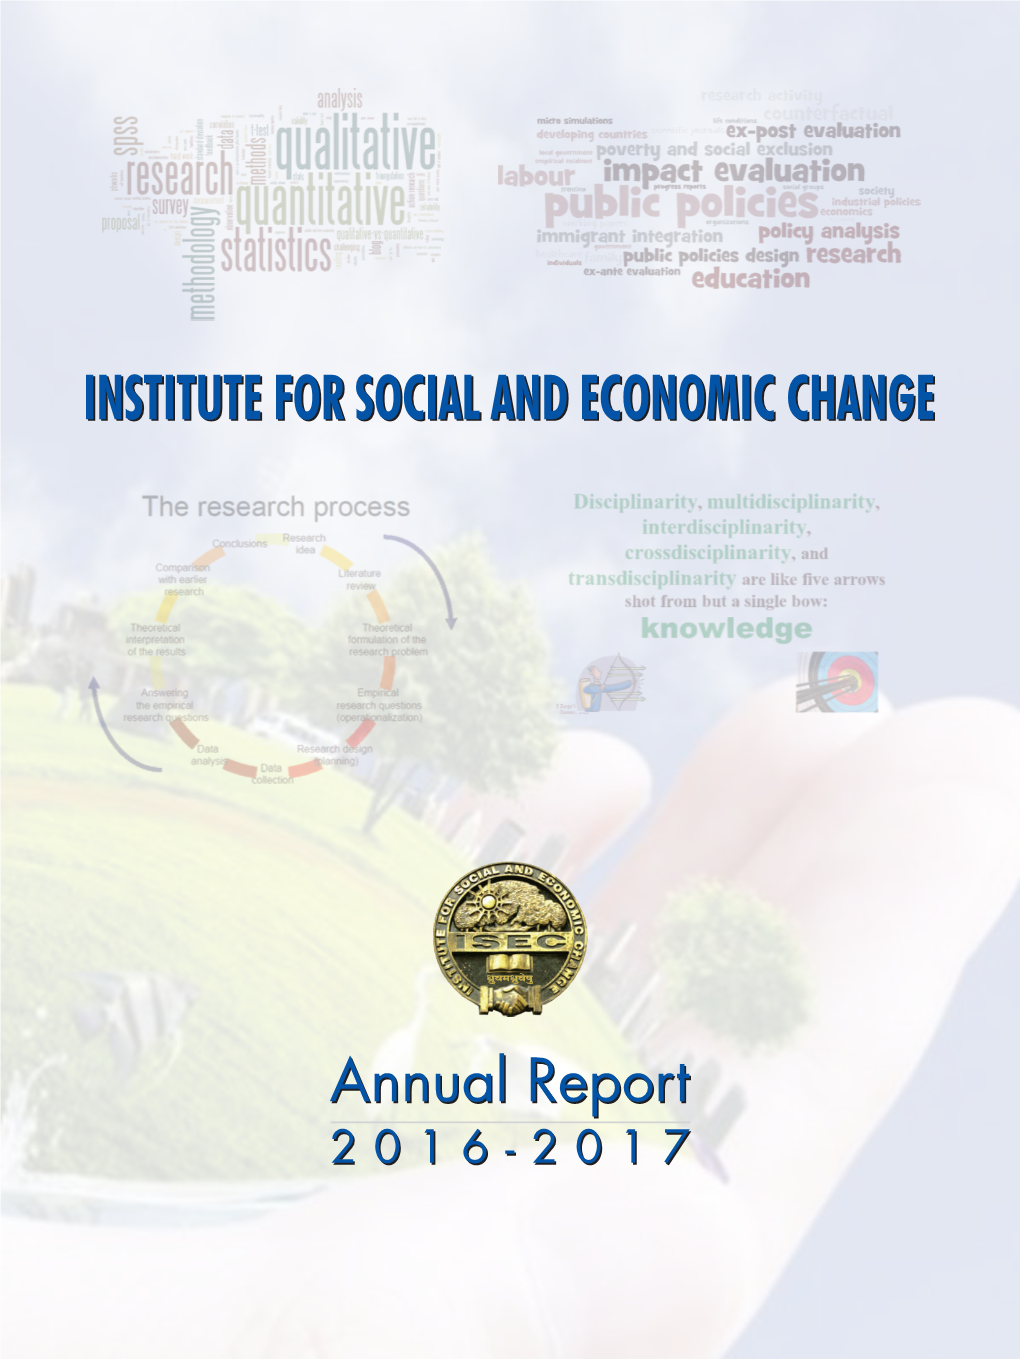 Annual Report 2016-17: at a Glance